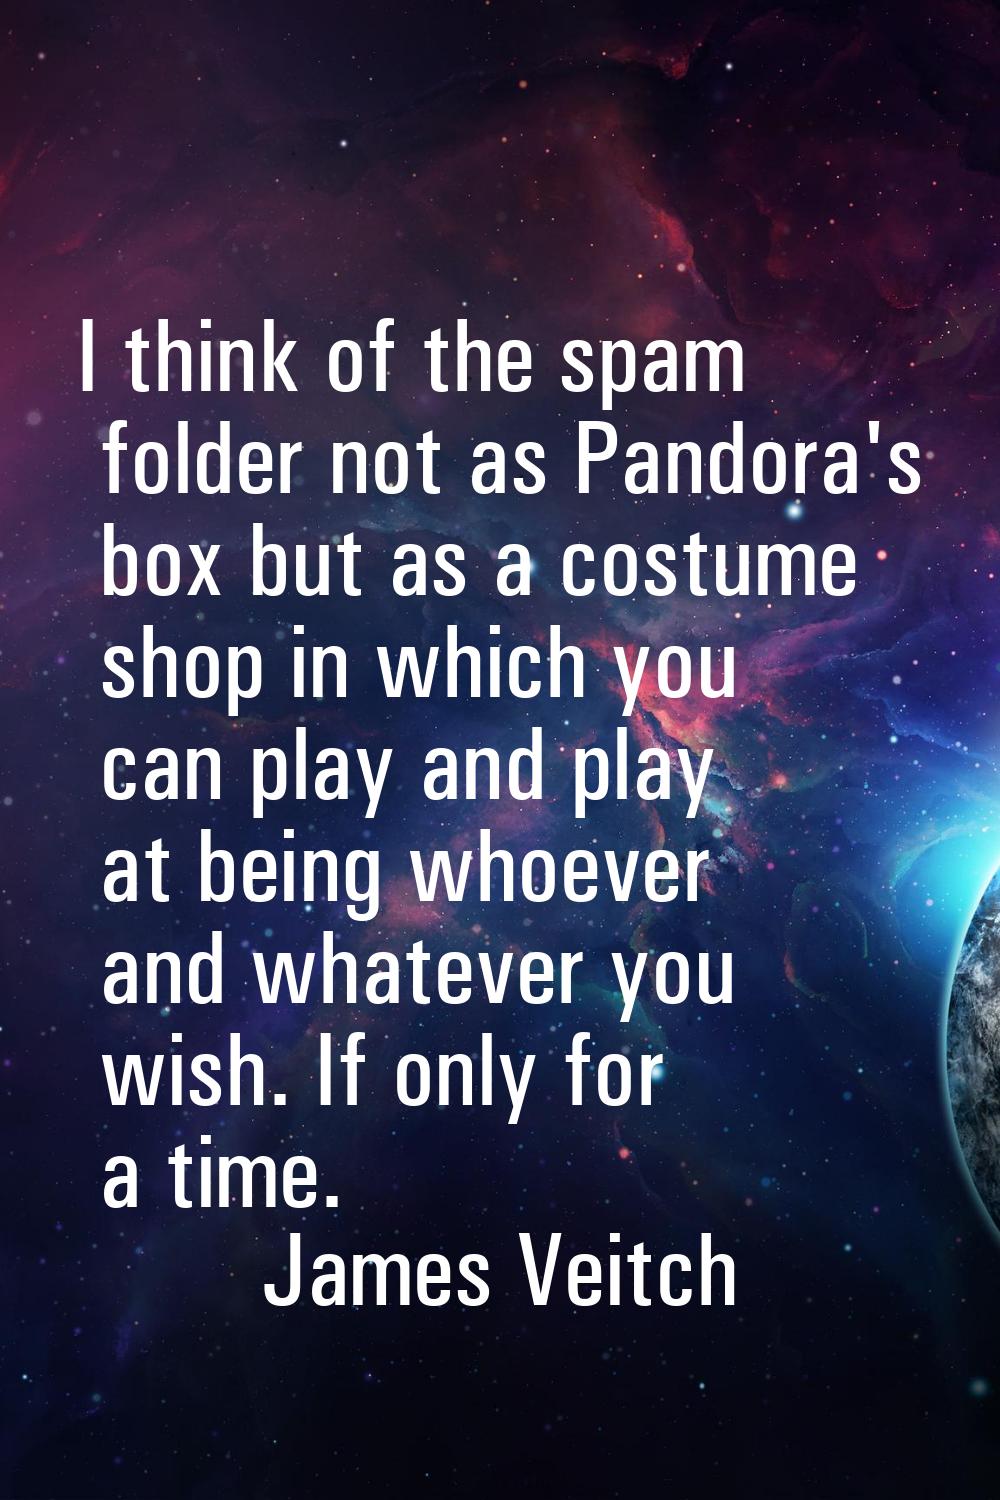 I think of the spam folder not as Pandora's box but as a costume shop in which you can play and pla